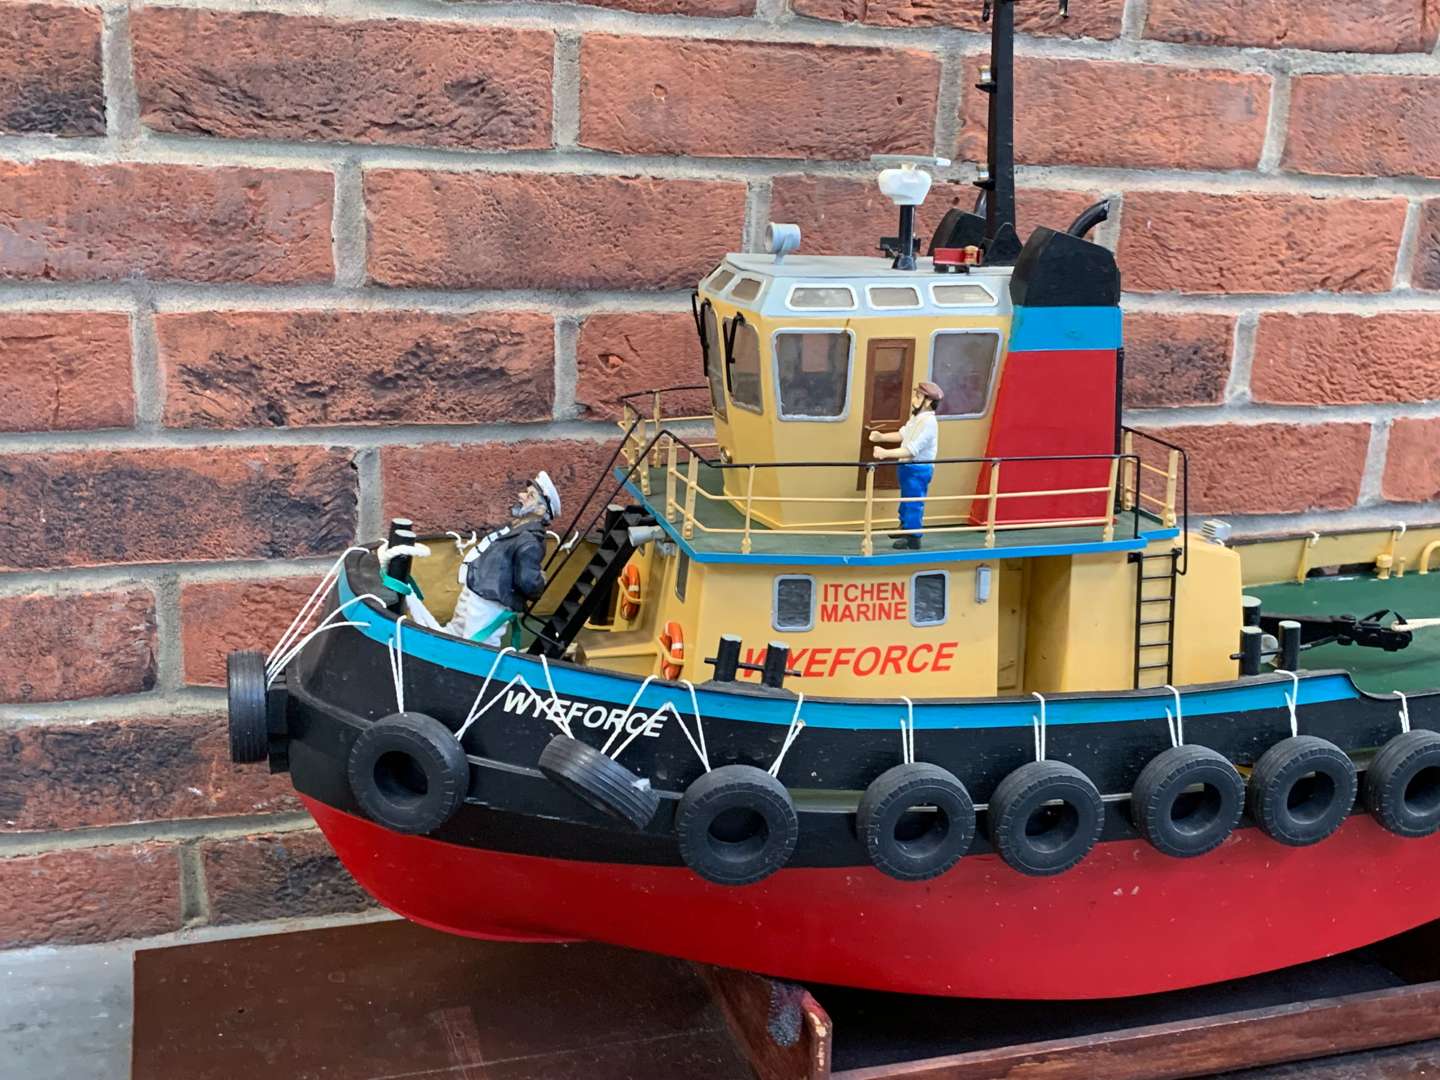 <p>Scratch Built Remote Controlled “Wyeforce” Tug Boat</p>